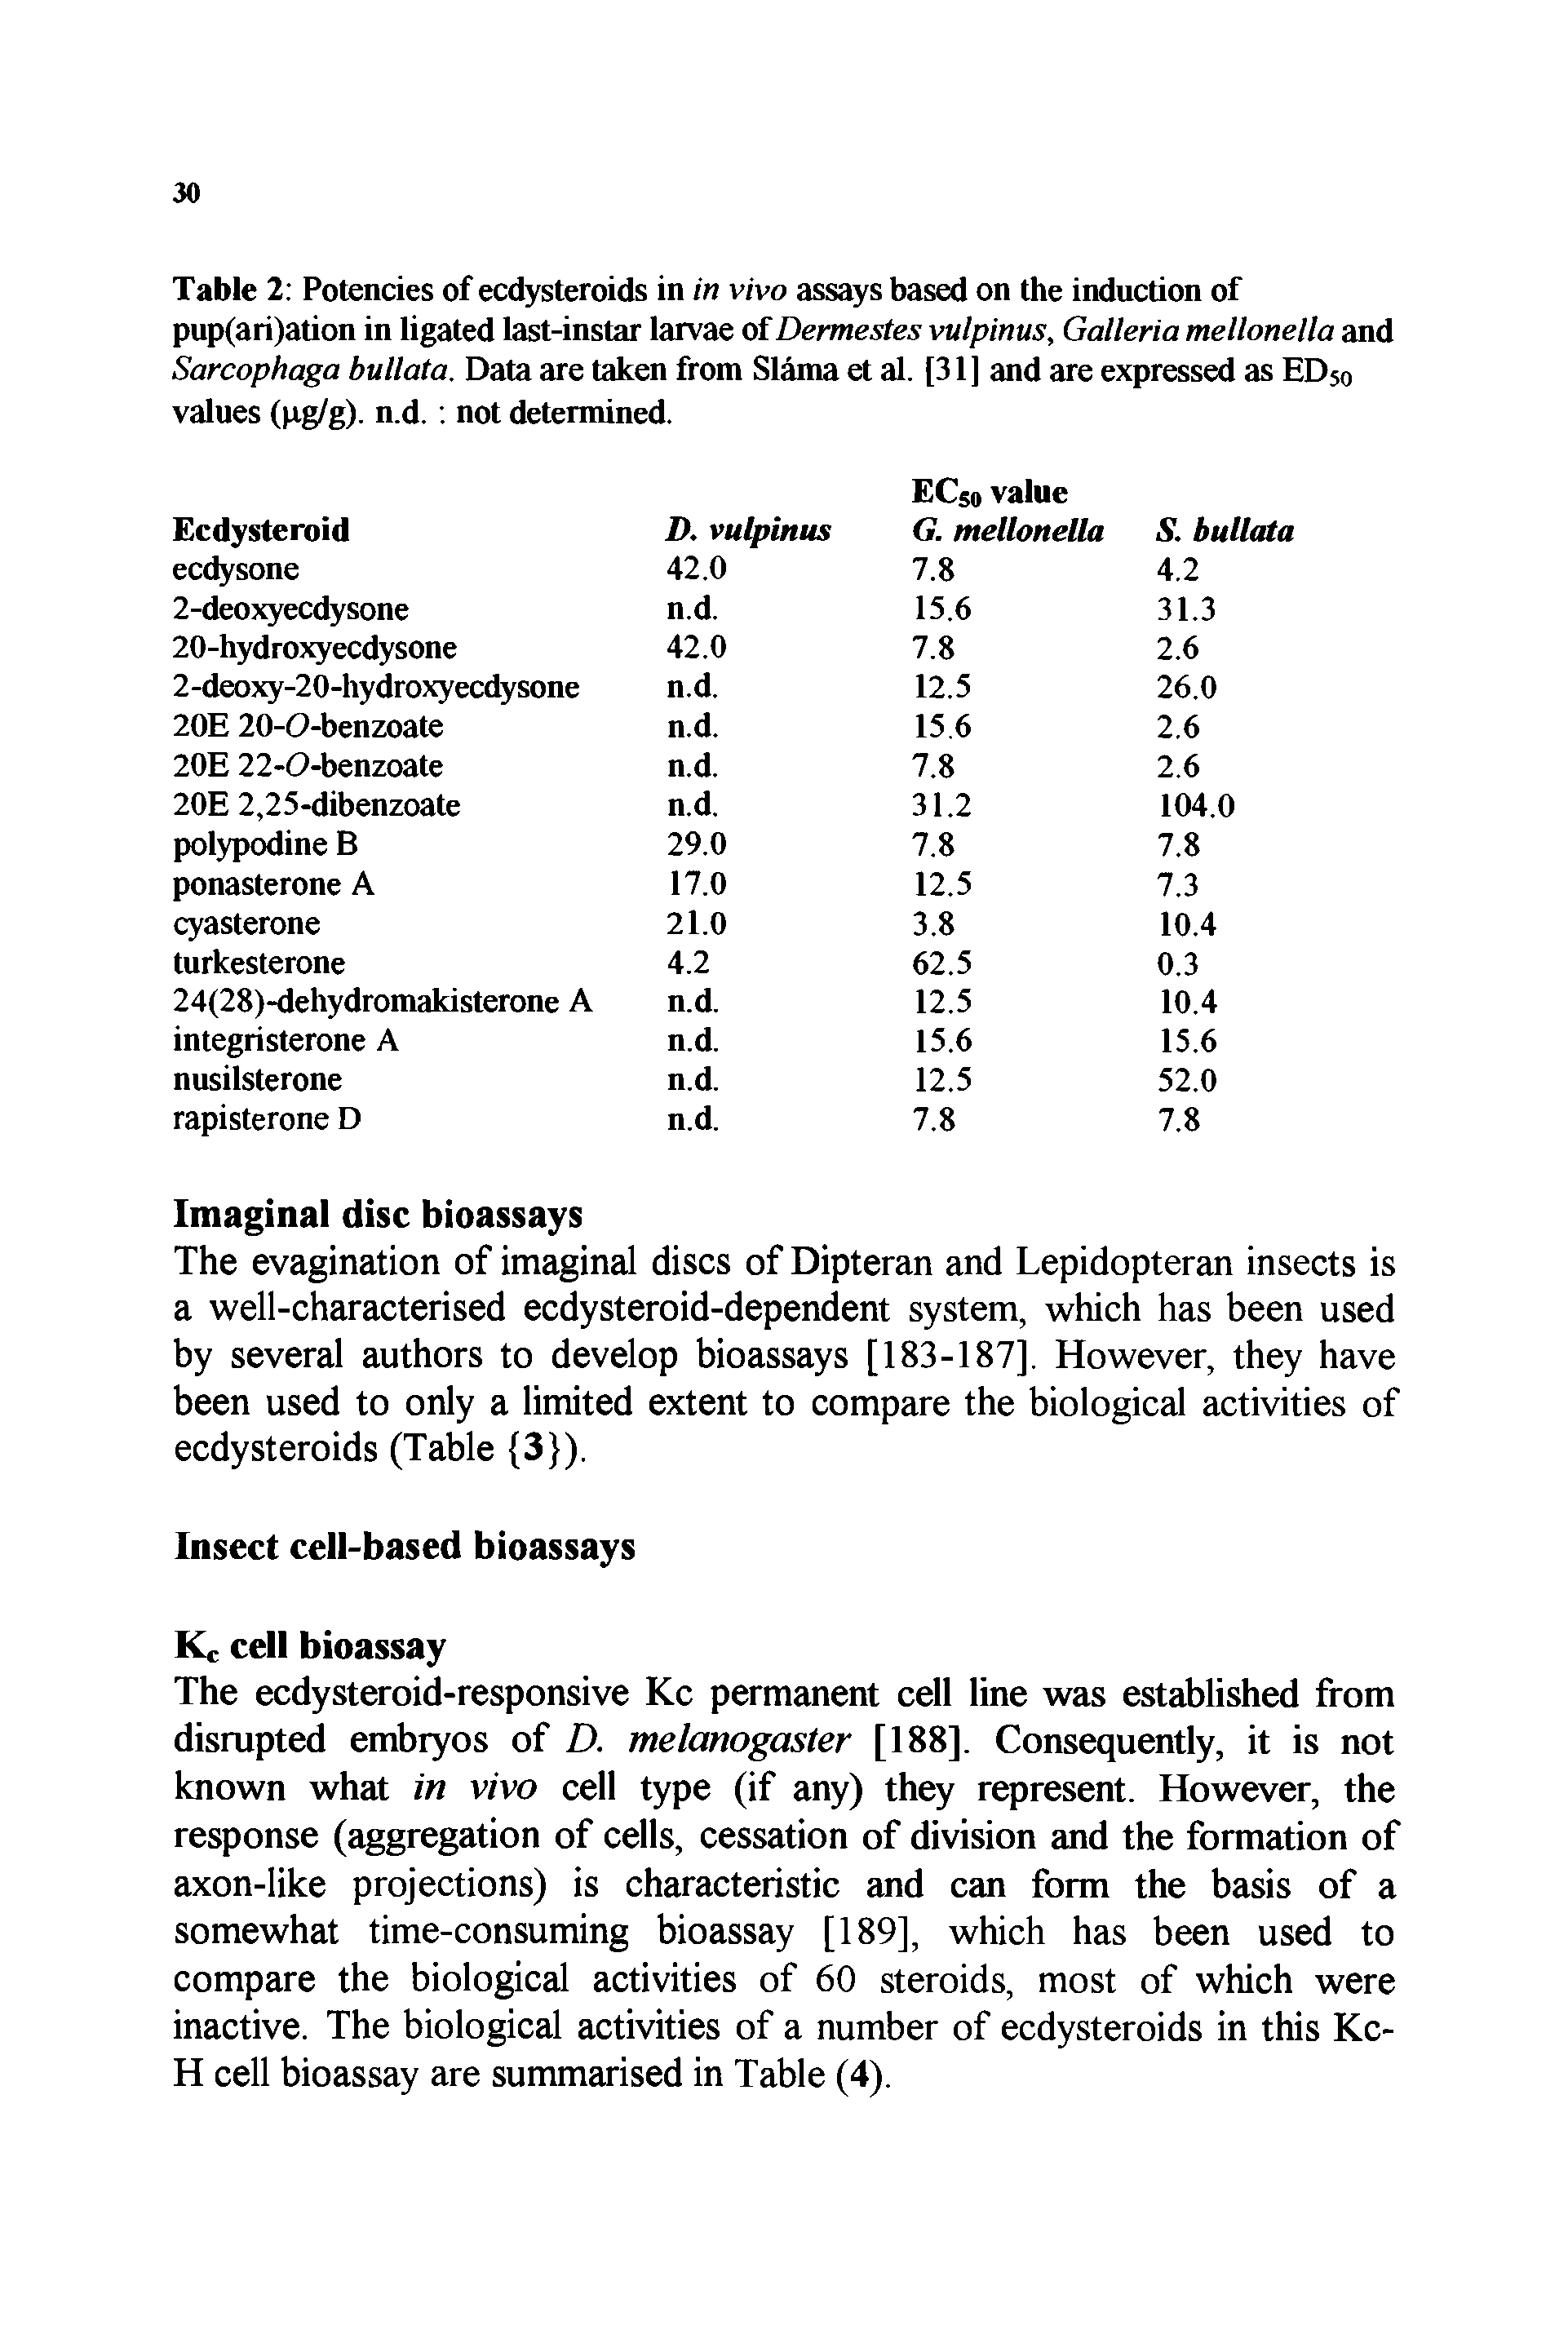 Table 2 Potencies of ecdysteroids in in vivo assays based on the induction of pup(ari)ation in ligated last-instar larvae of Dermestes vulpinus, Galleria mellonella and Sarcophaga bullata. Data are taken from Slama et al. [31] and are expressed as ED50 values (pg/g). n.d. not determined.